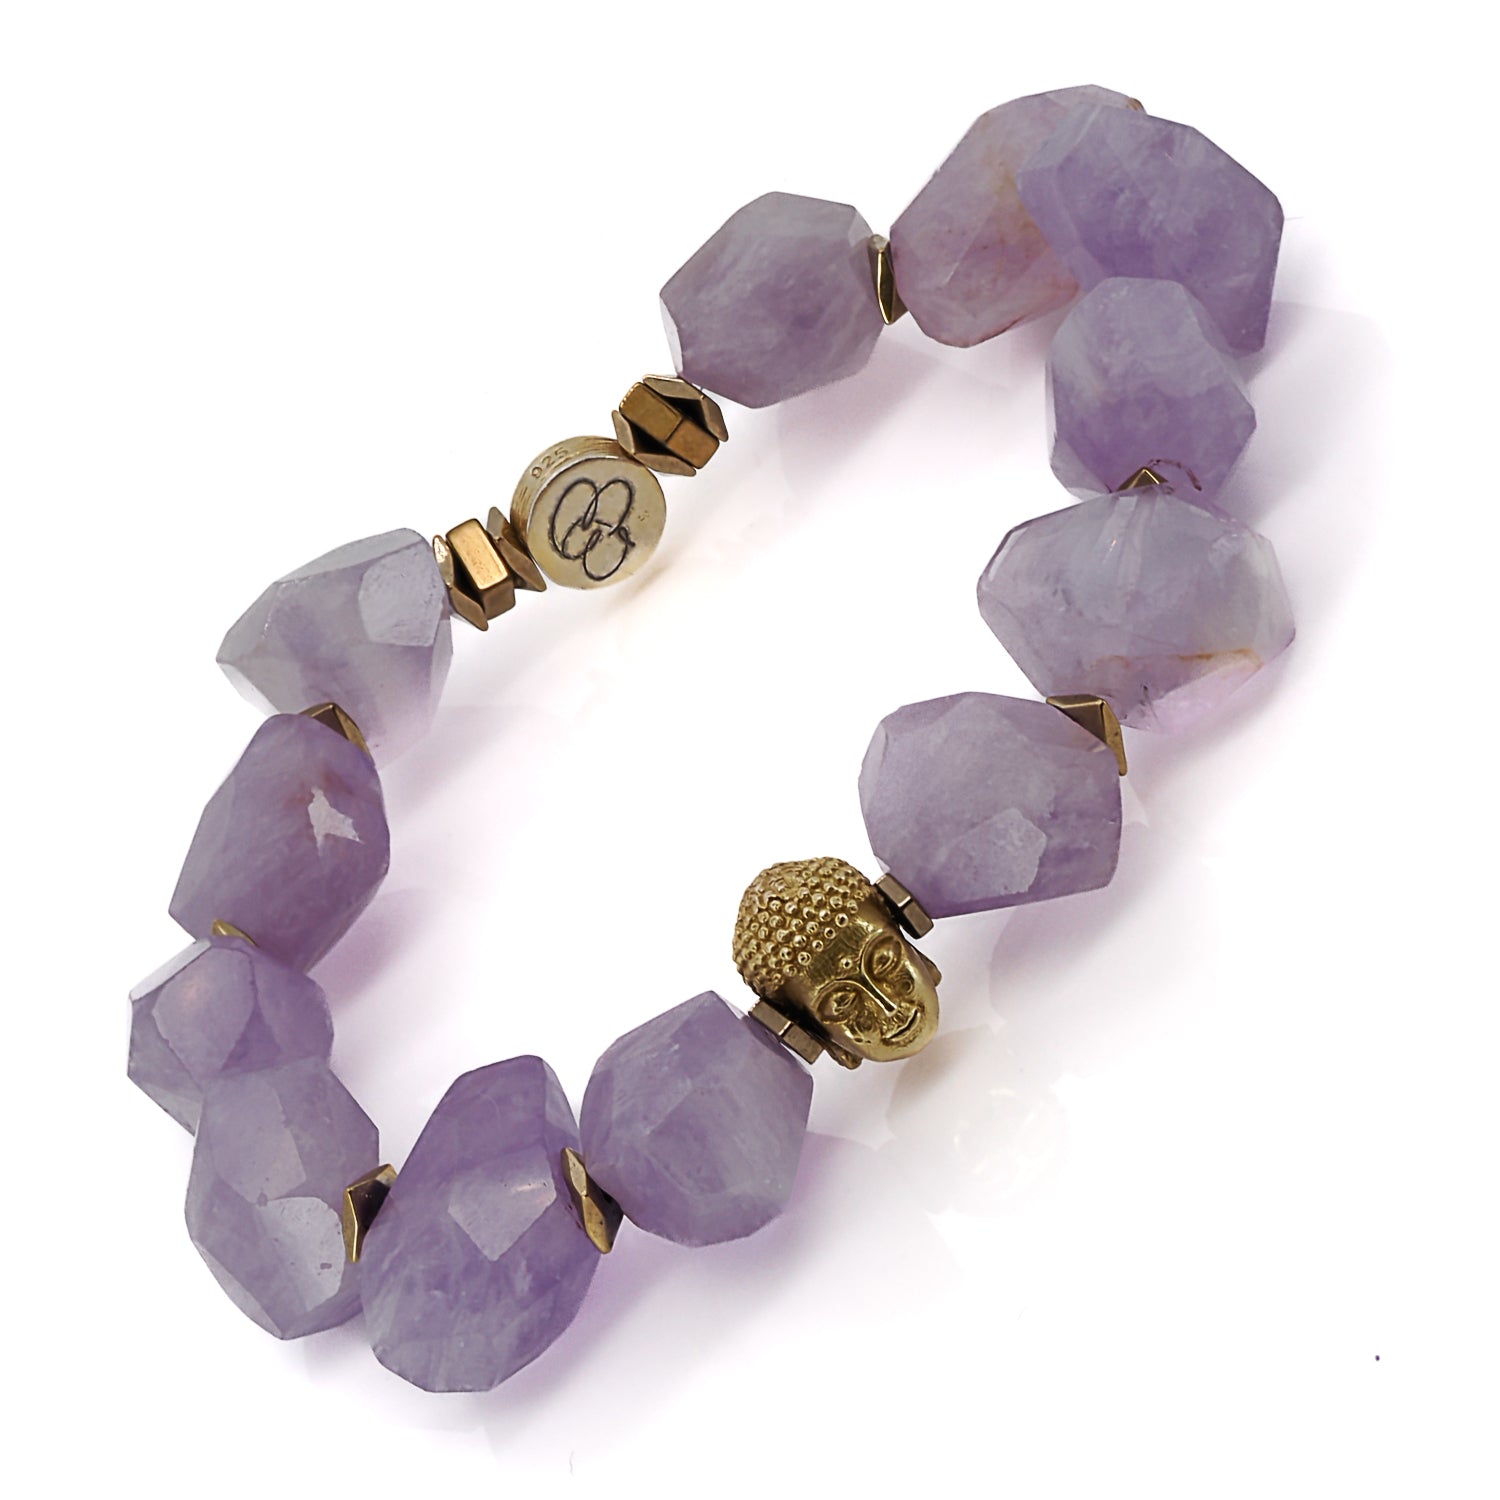 The stunning amethyst stone beads, known for their calming and protective properties, adding a sense of serenity to the bracelet.